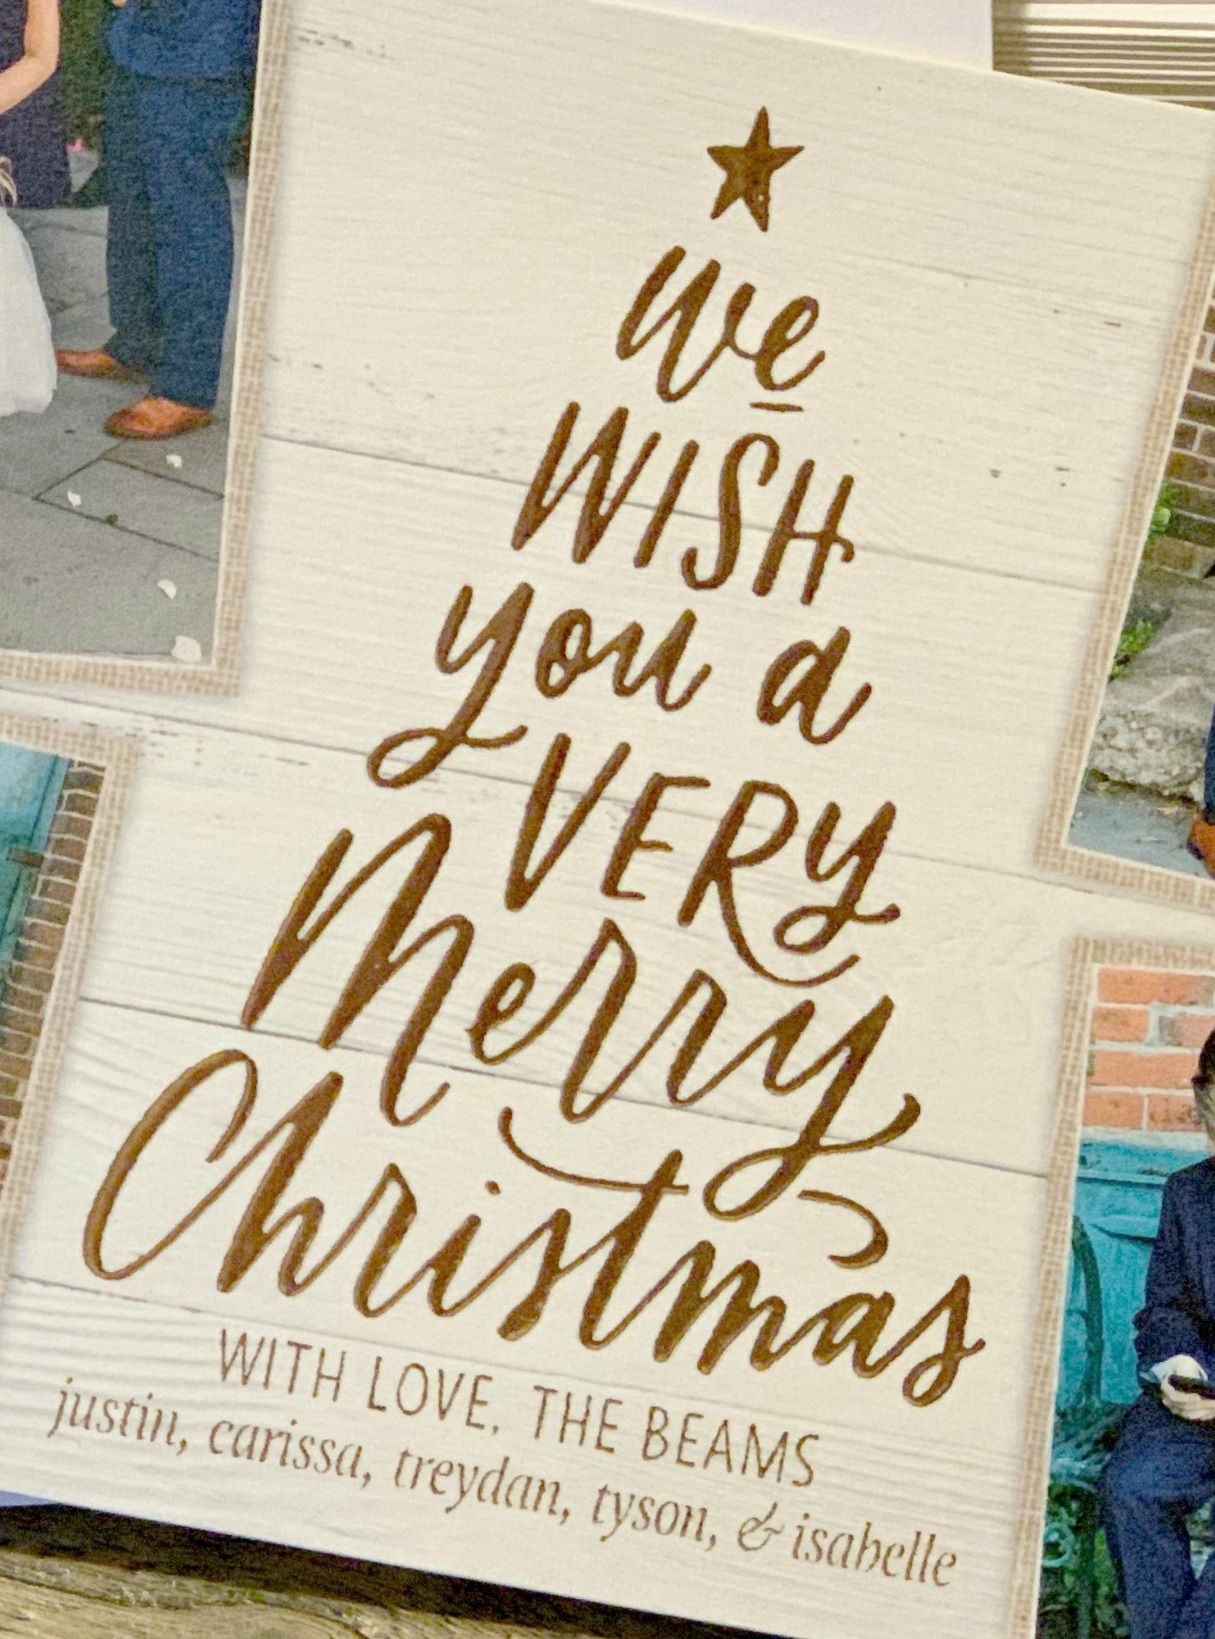 Capture the Spirit of the Season with Shutterfly Holiday Cards